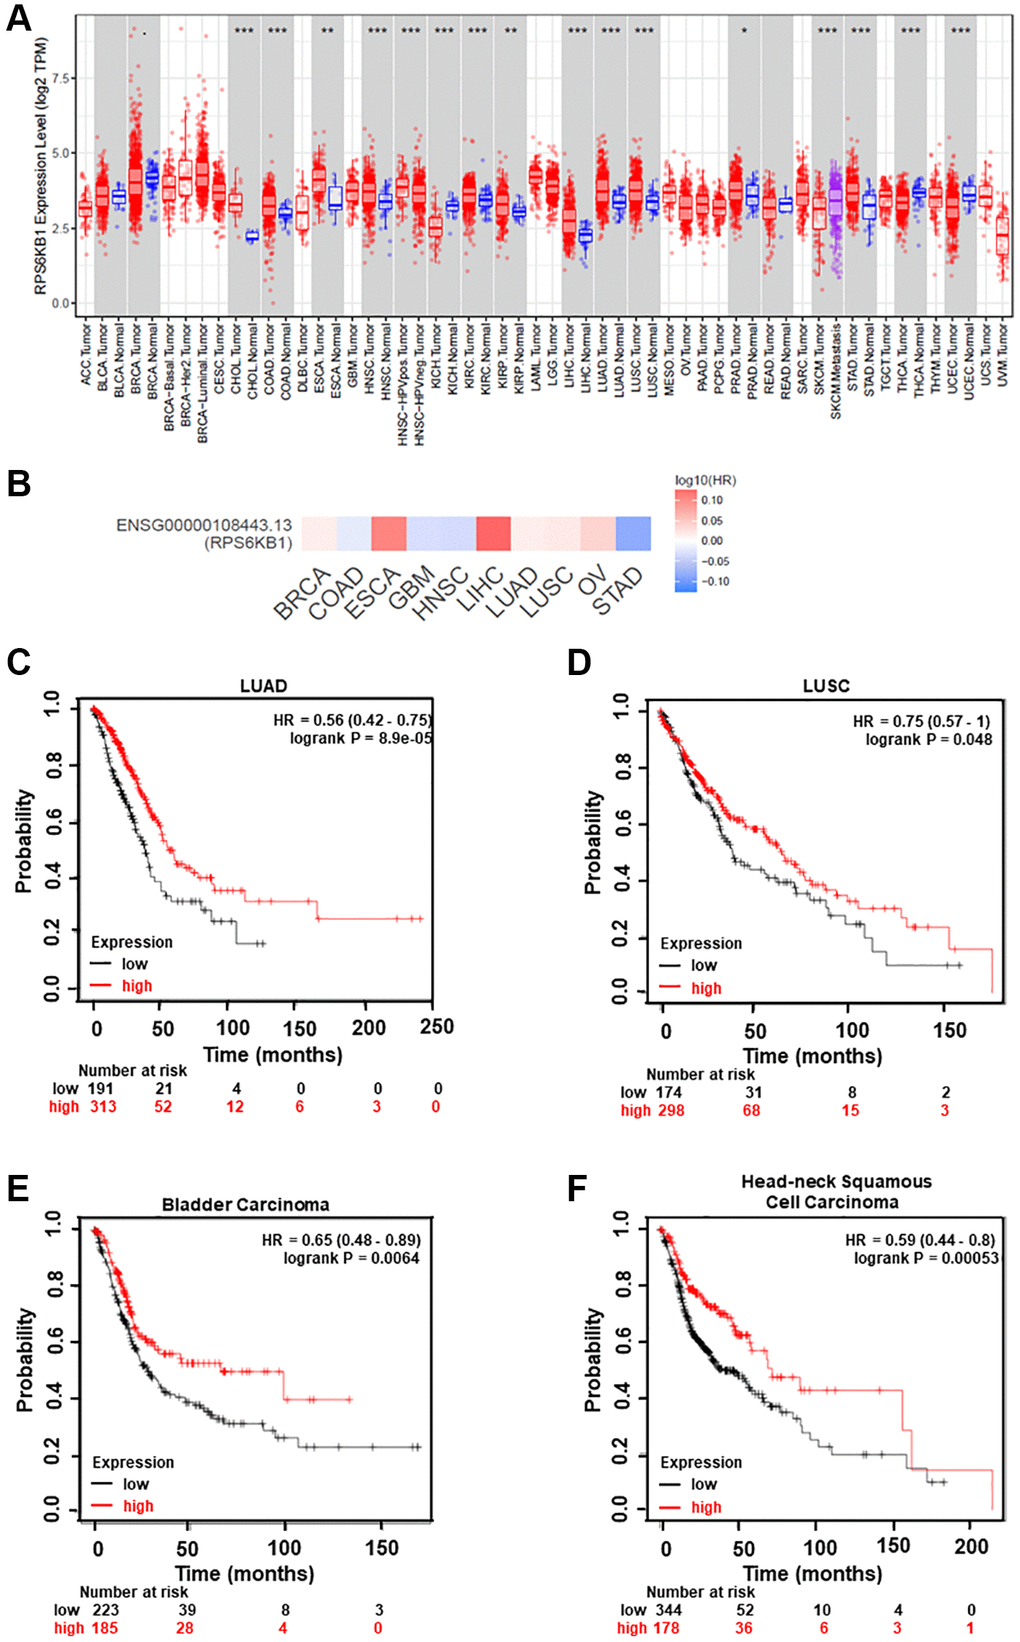 Analysis of RPS6KB1 and miR-30e expression levels, overall patient survival rate and tumor progression in several types of cancer. (A) Human RPS6KB1 levels in different types of tumor from TCGA were determined using TIMER database (http://timer.comp-genomics.org/), and RPS6KB1 expression is upregulated in most types of tumor. (B) GEPIA (http://gepia.cancer-pku.cn/index.html) was used to analyze the prognostic value of RPS6KB1 expression based on the log-rank test in 10 types of cancer. (C–F) Kaplan-Meier plotter (http://kmplot.com/analysis/), an online database of published microarray datasets, was used to analyze the correlation between miR-30e expression levels and overall patient survival in lung adenocarcinoma (LUAD), lung squamous cell carcinoma (LUSC), bladder carcinoma and head and neck squamous cell carcinoma.